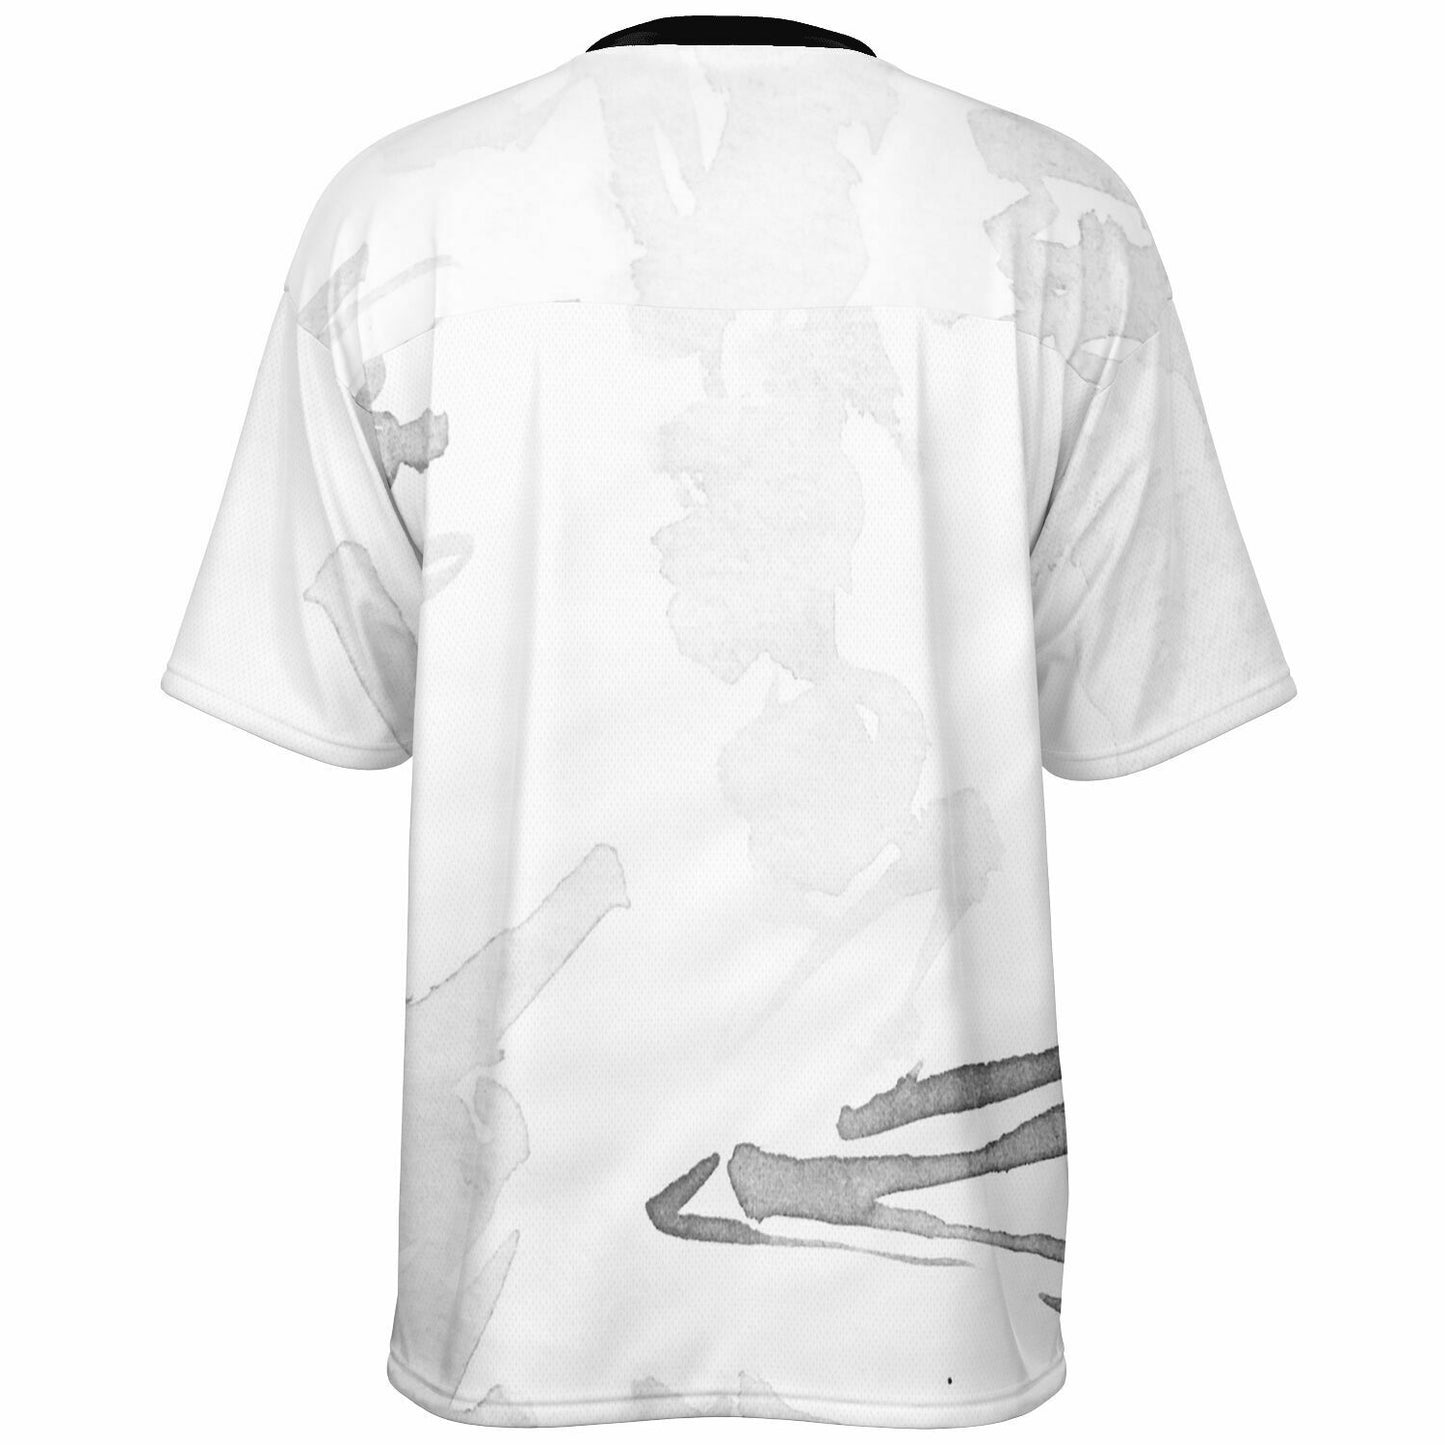 All Over Print Football Jersey